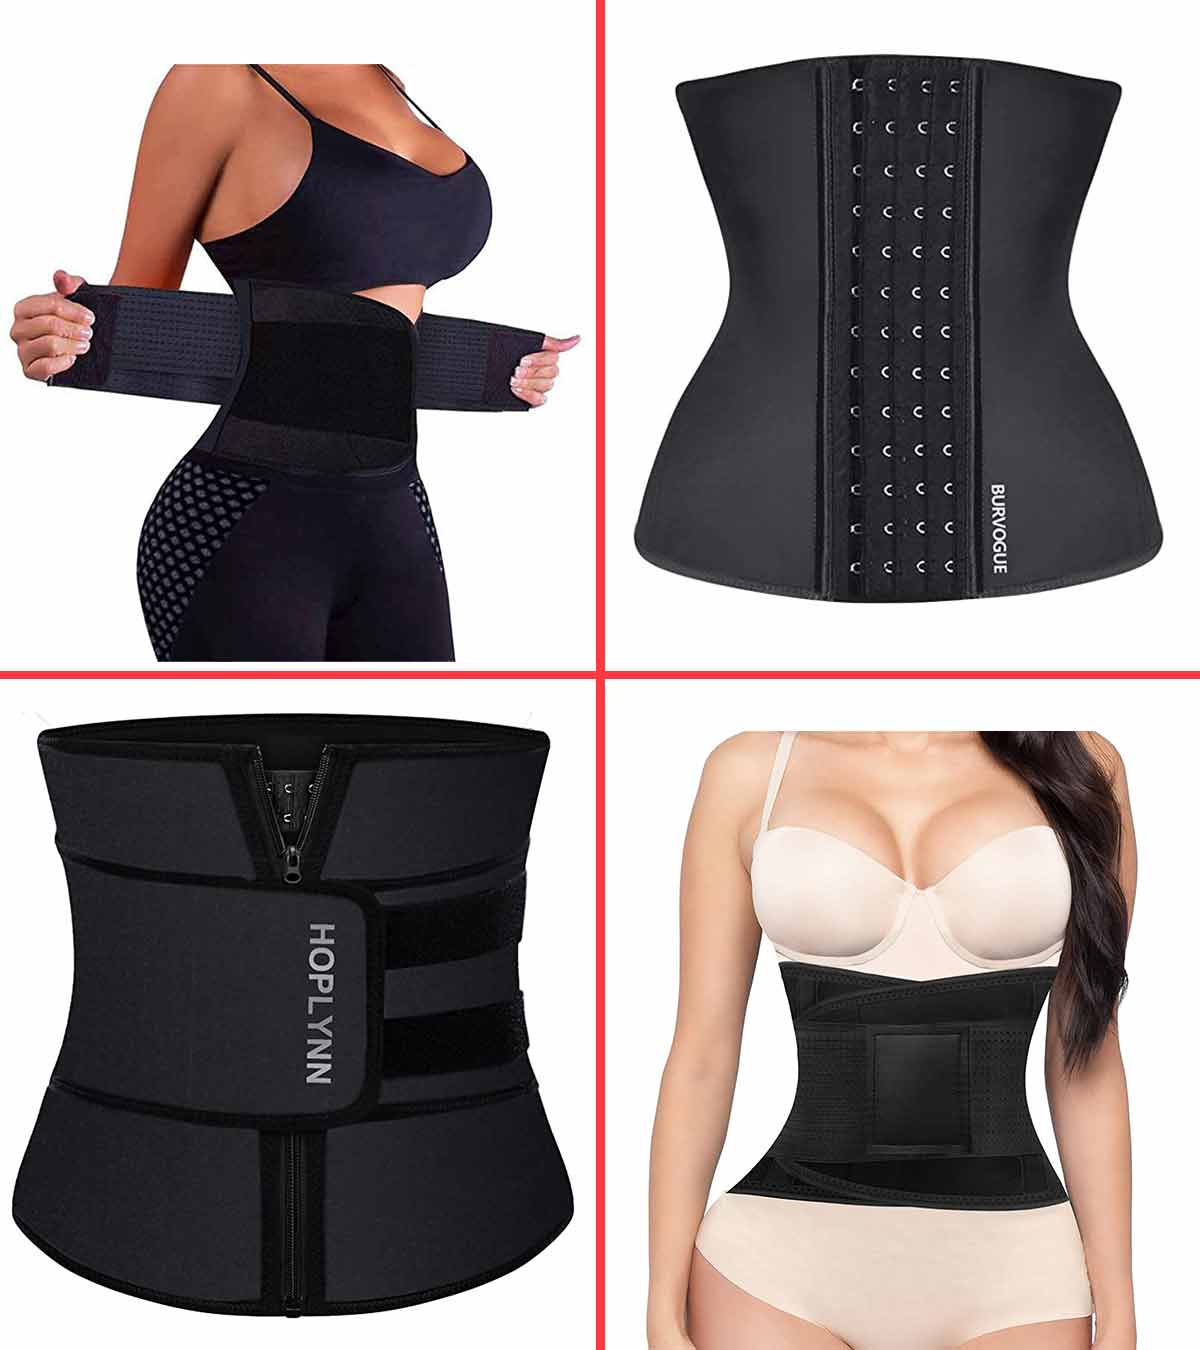 How to Use Oways Slimming Belt: How does Vibration Slimming Belt